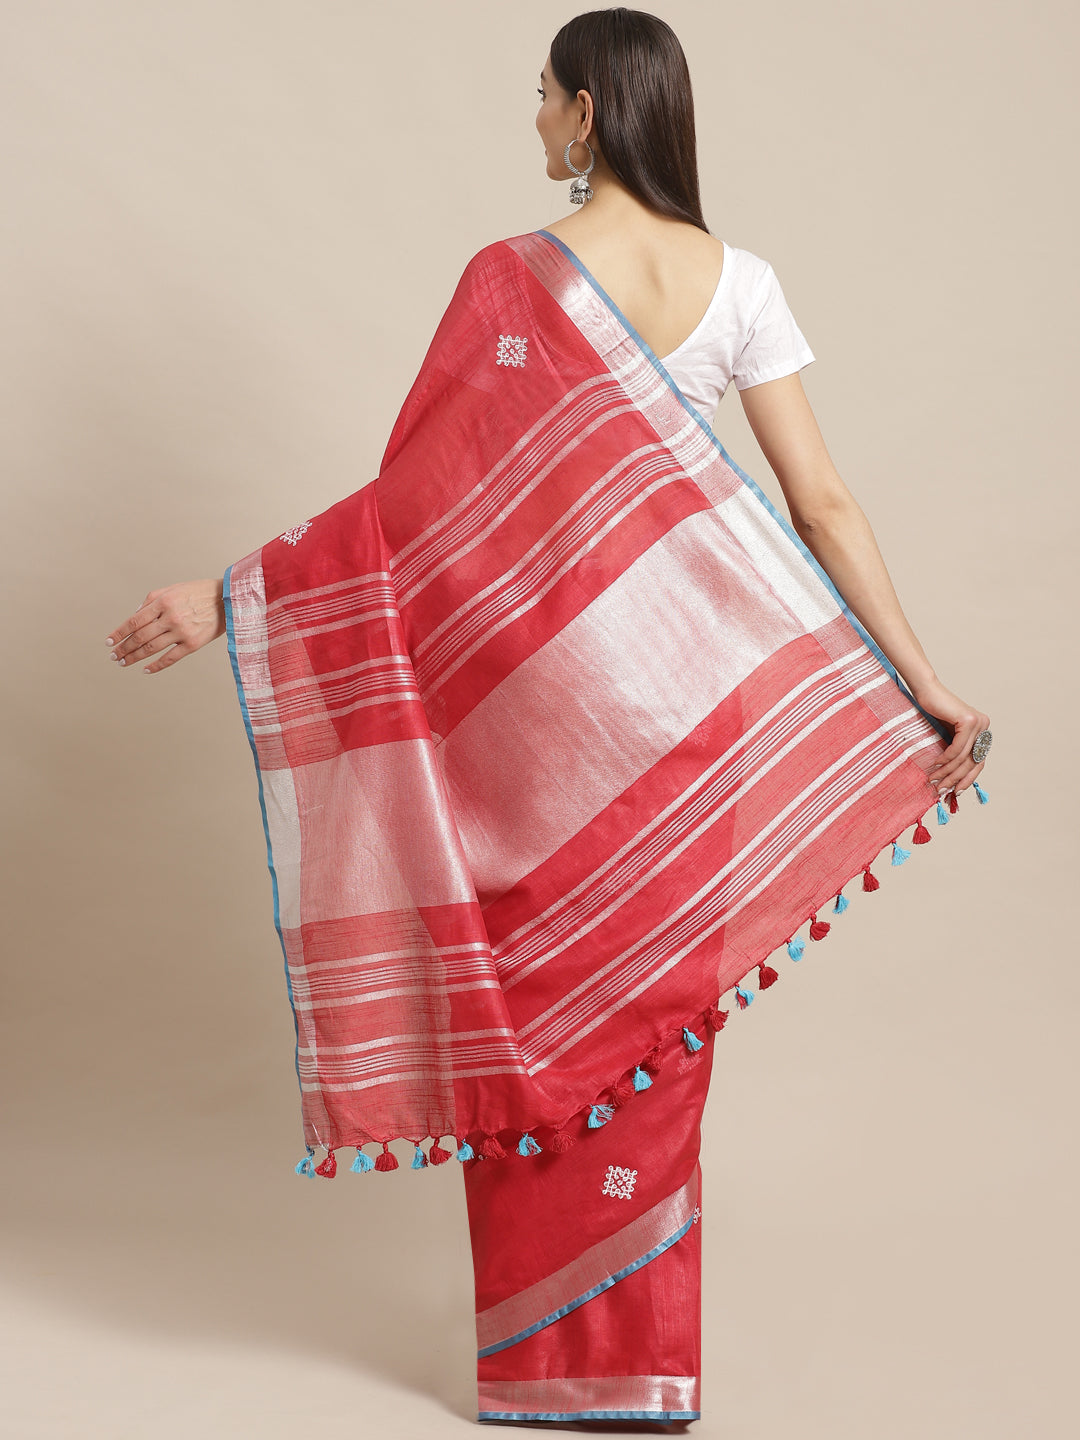 Red and Pink, Kalakari India Linen Woven Saree and Blouse ALBGSA0067-Saree-Kalakari India-ALBGSA0067-Cotton, Geographical Indication, Hand Crafted, Heritage Prints, Linen, Natural Dyes, Red, Sarees, Shibori, Sustainable Fabrics, Woven, Yellow-[Linen,Ethnic,wear,Fashionista,Handloom,Handicraft,Indigo,blockprint,block,print,Cotton,Chanderi,Blue, latest,classy,party,bollywood,trendy,summer,style,traditional,formal,elegant,unique,style,hand,block,print, dabu,booti,gift,present,glamorous,affordable,c